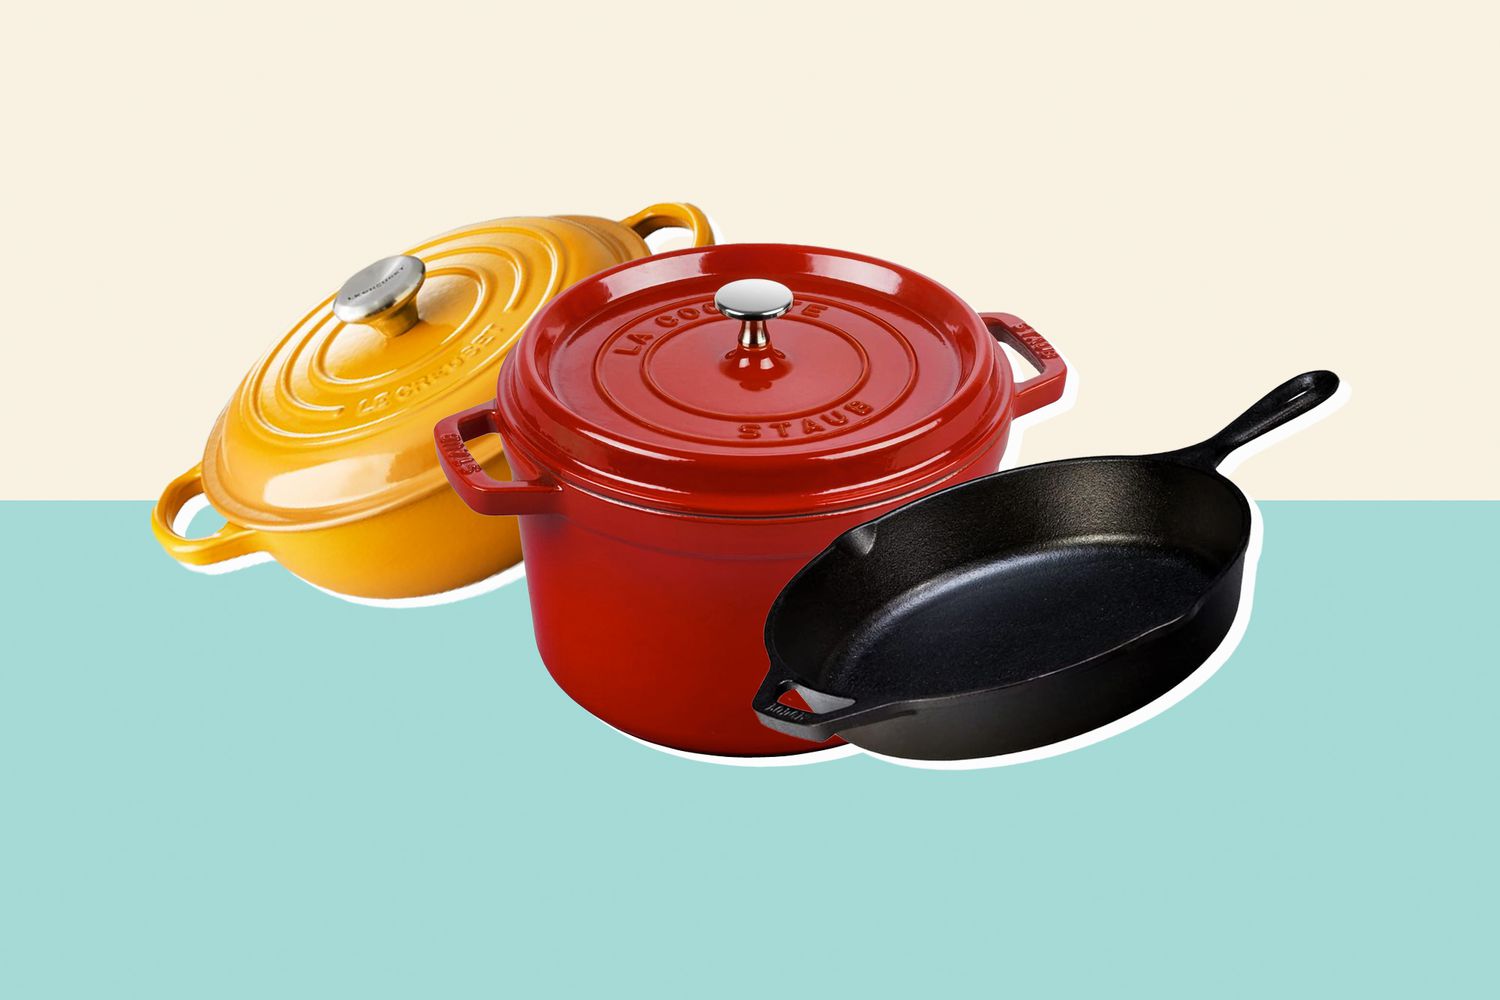 3 cast iron pots and pans on a designed background